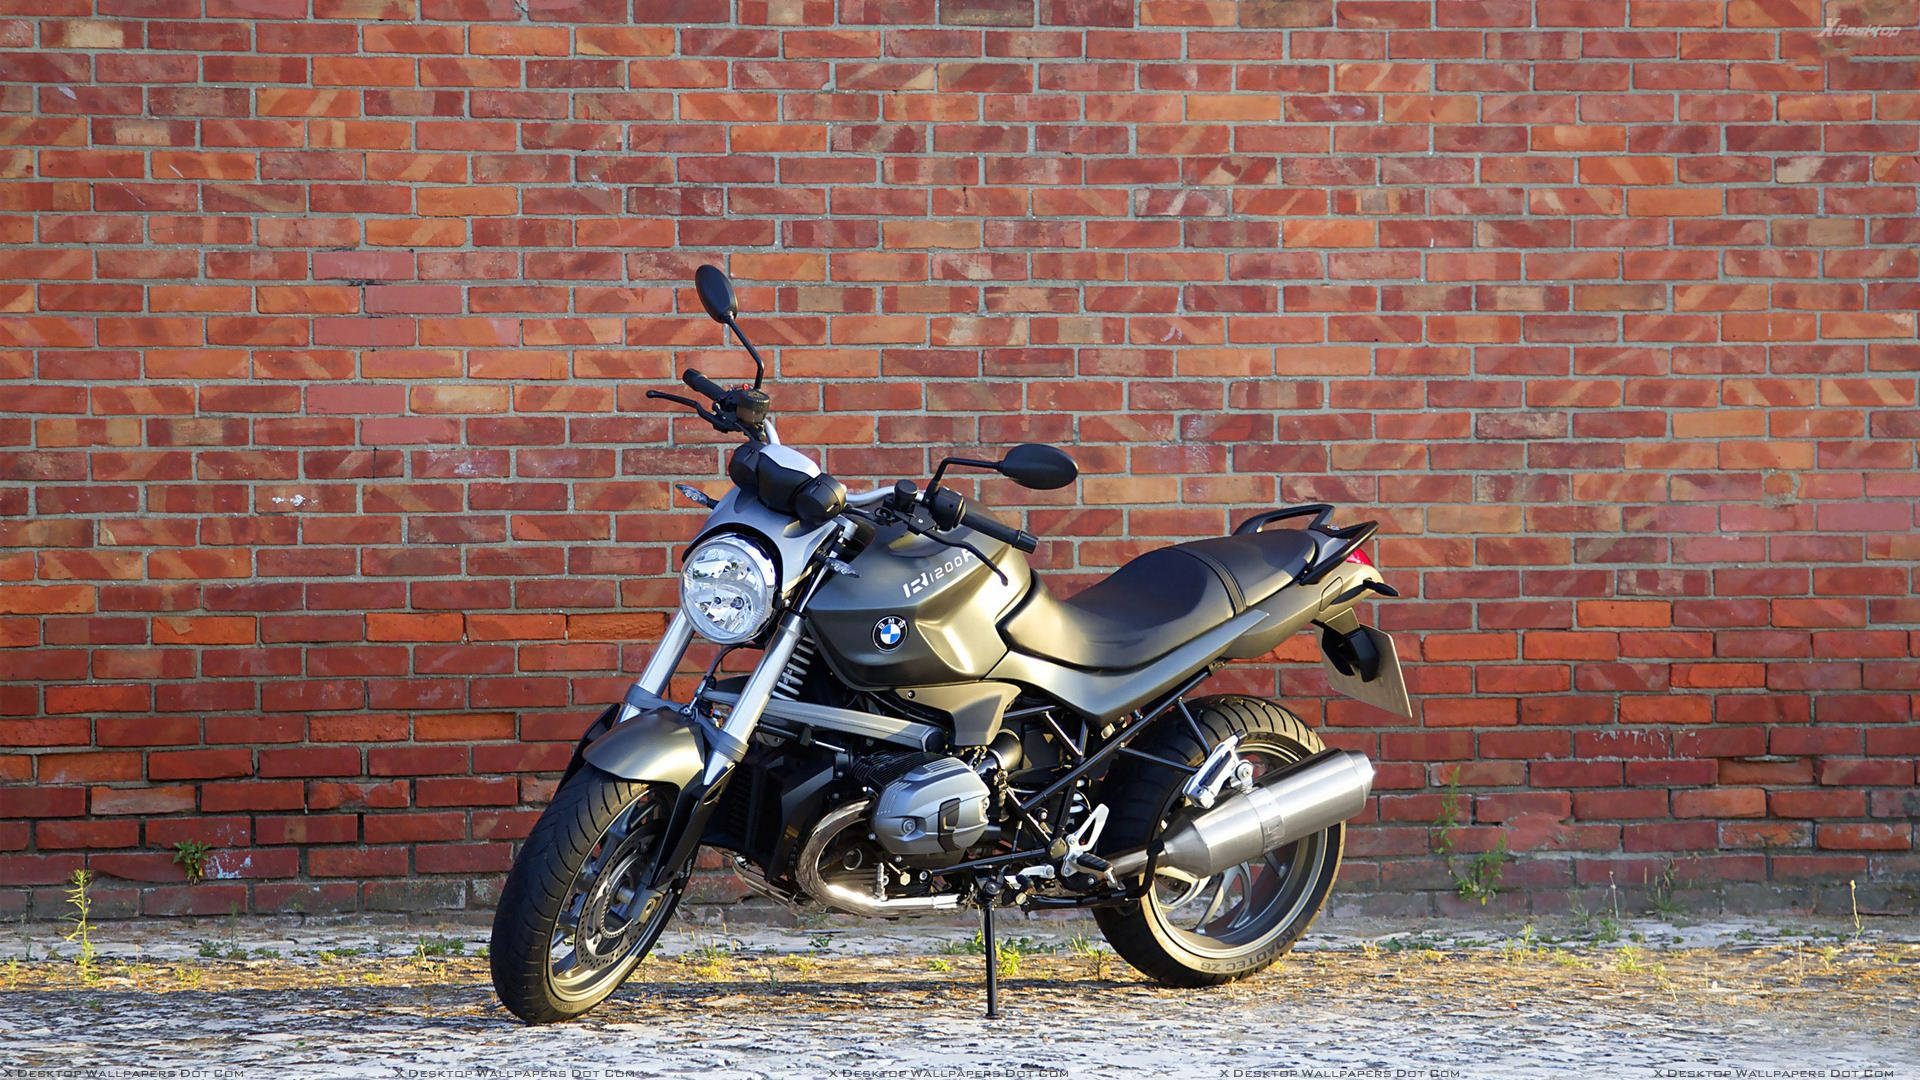 Cruise In Style On A Black Bmw R1200r Motorbike Background